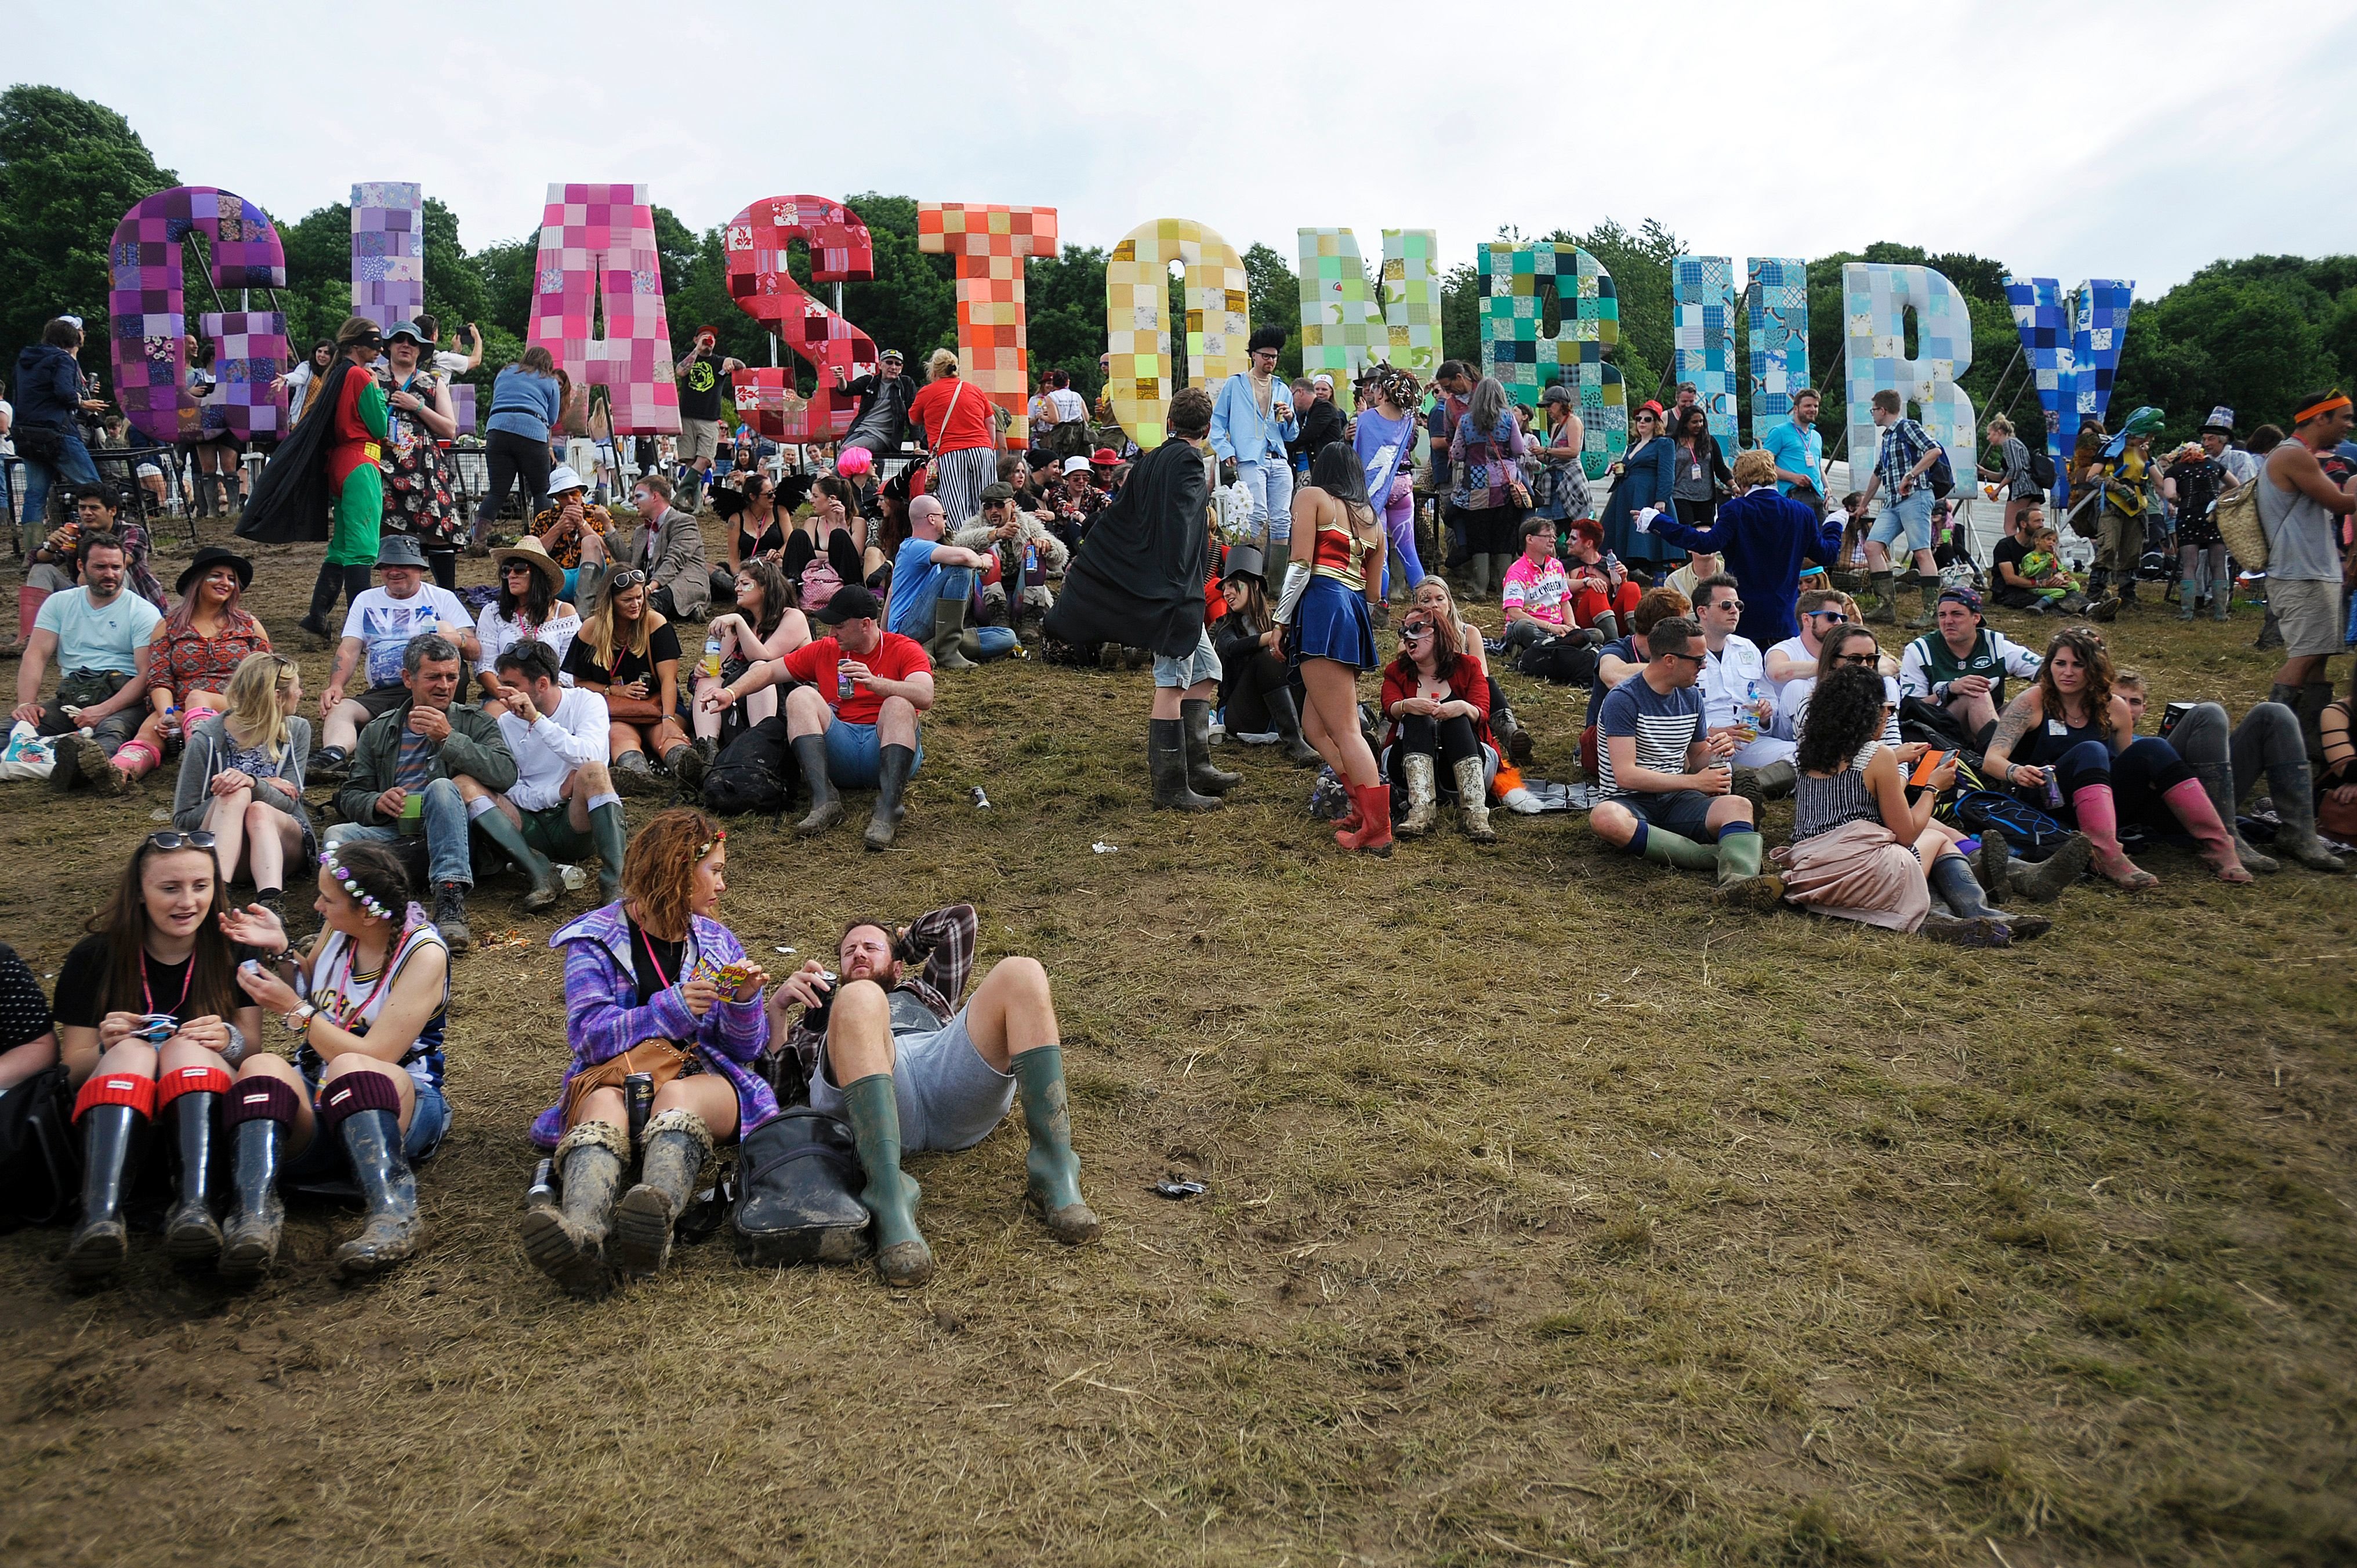 Glastonbury Is The UKs Most Promiscuous Festival, With More People Having Sex Than At Any Other HuffPost UK Life